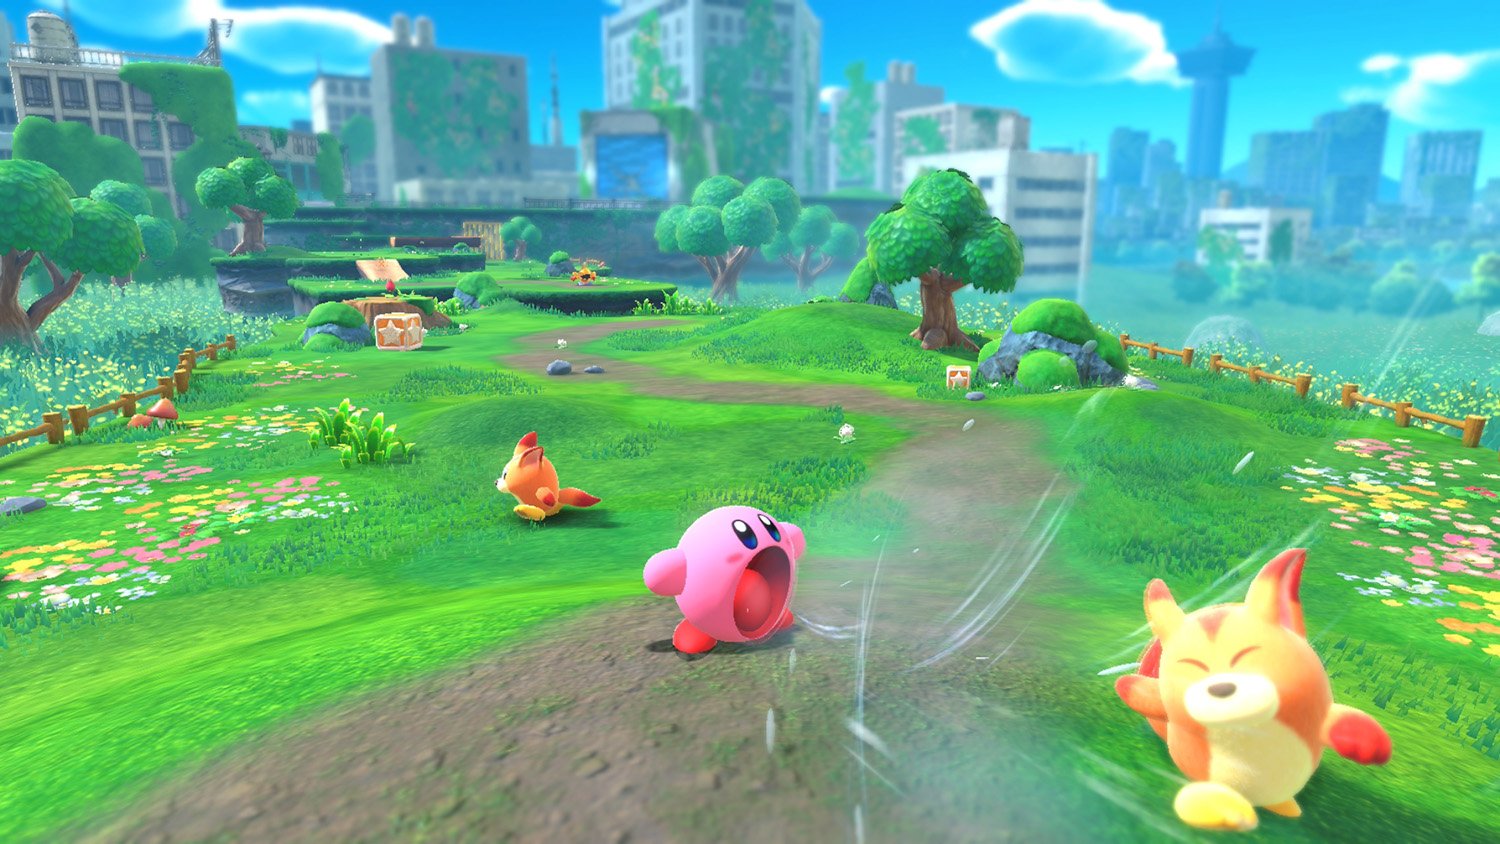 Kirby inhales an enemy in Kirby and the Forgotten Land